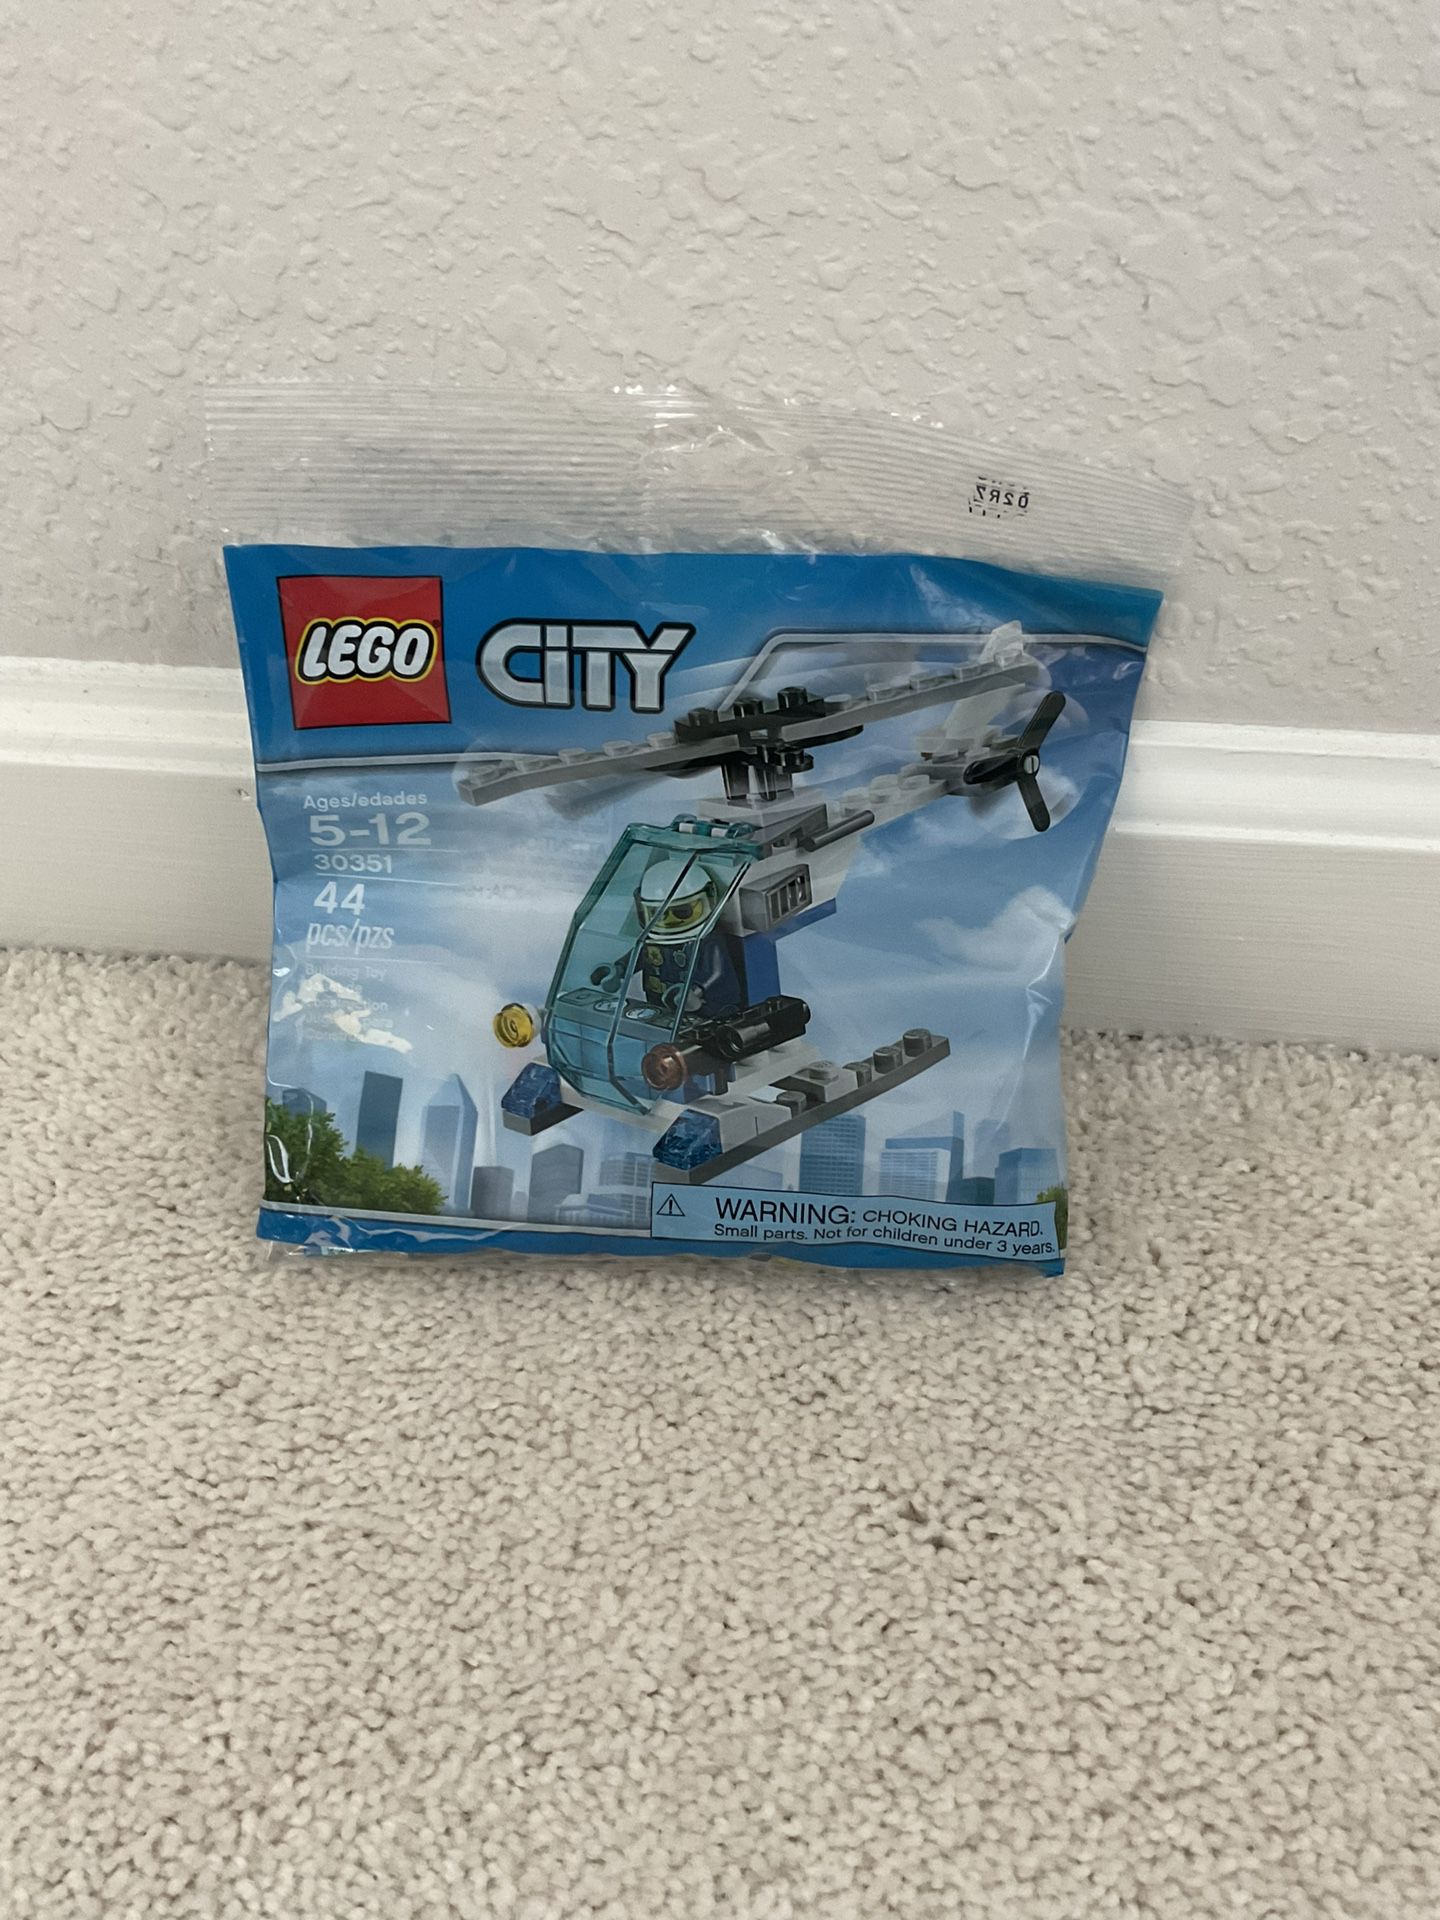 Lego City Police Helicopter Polybag